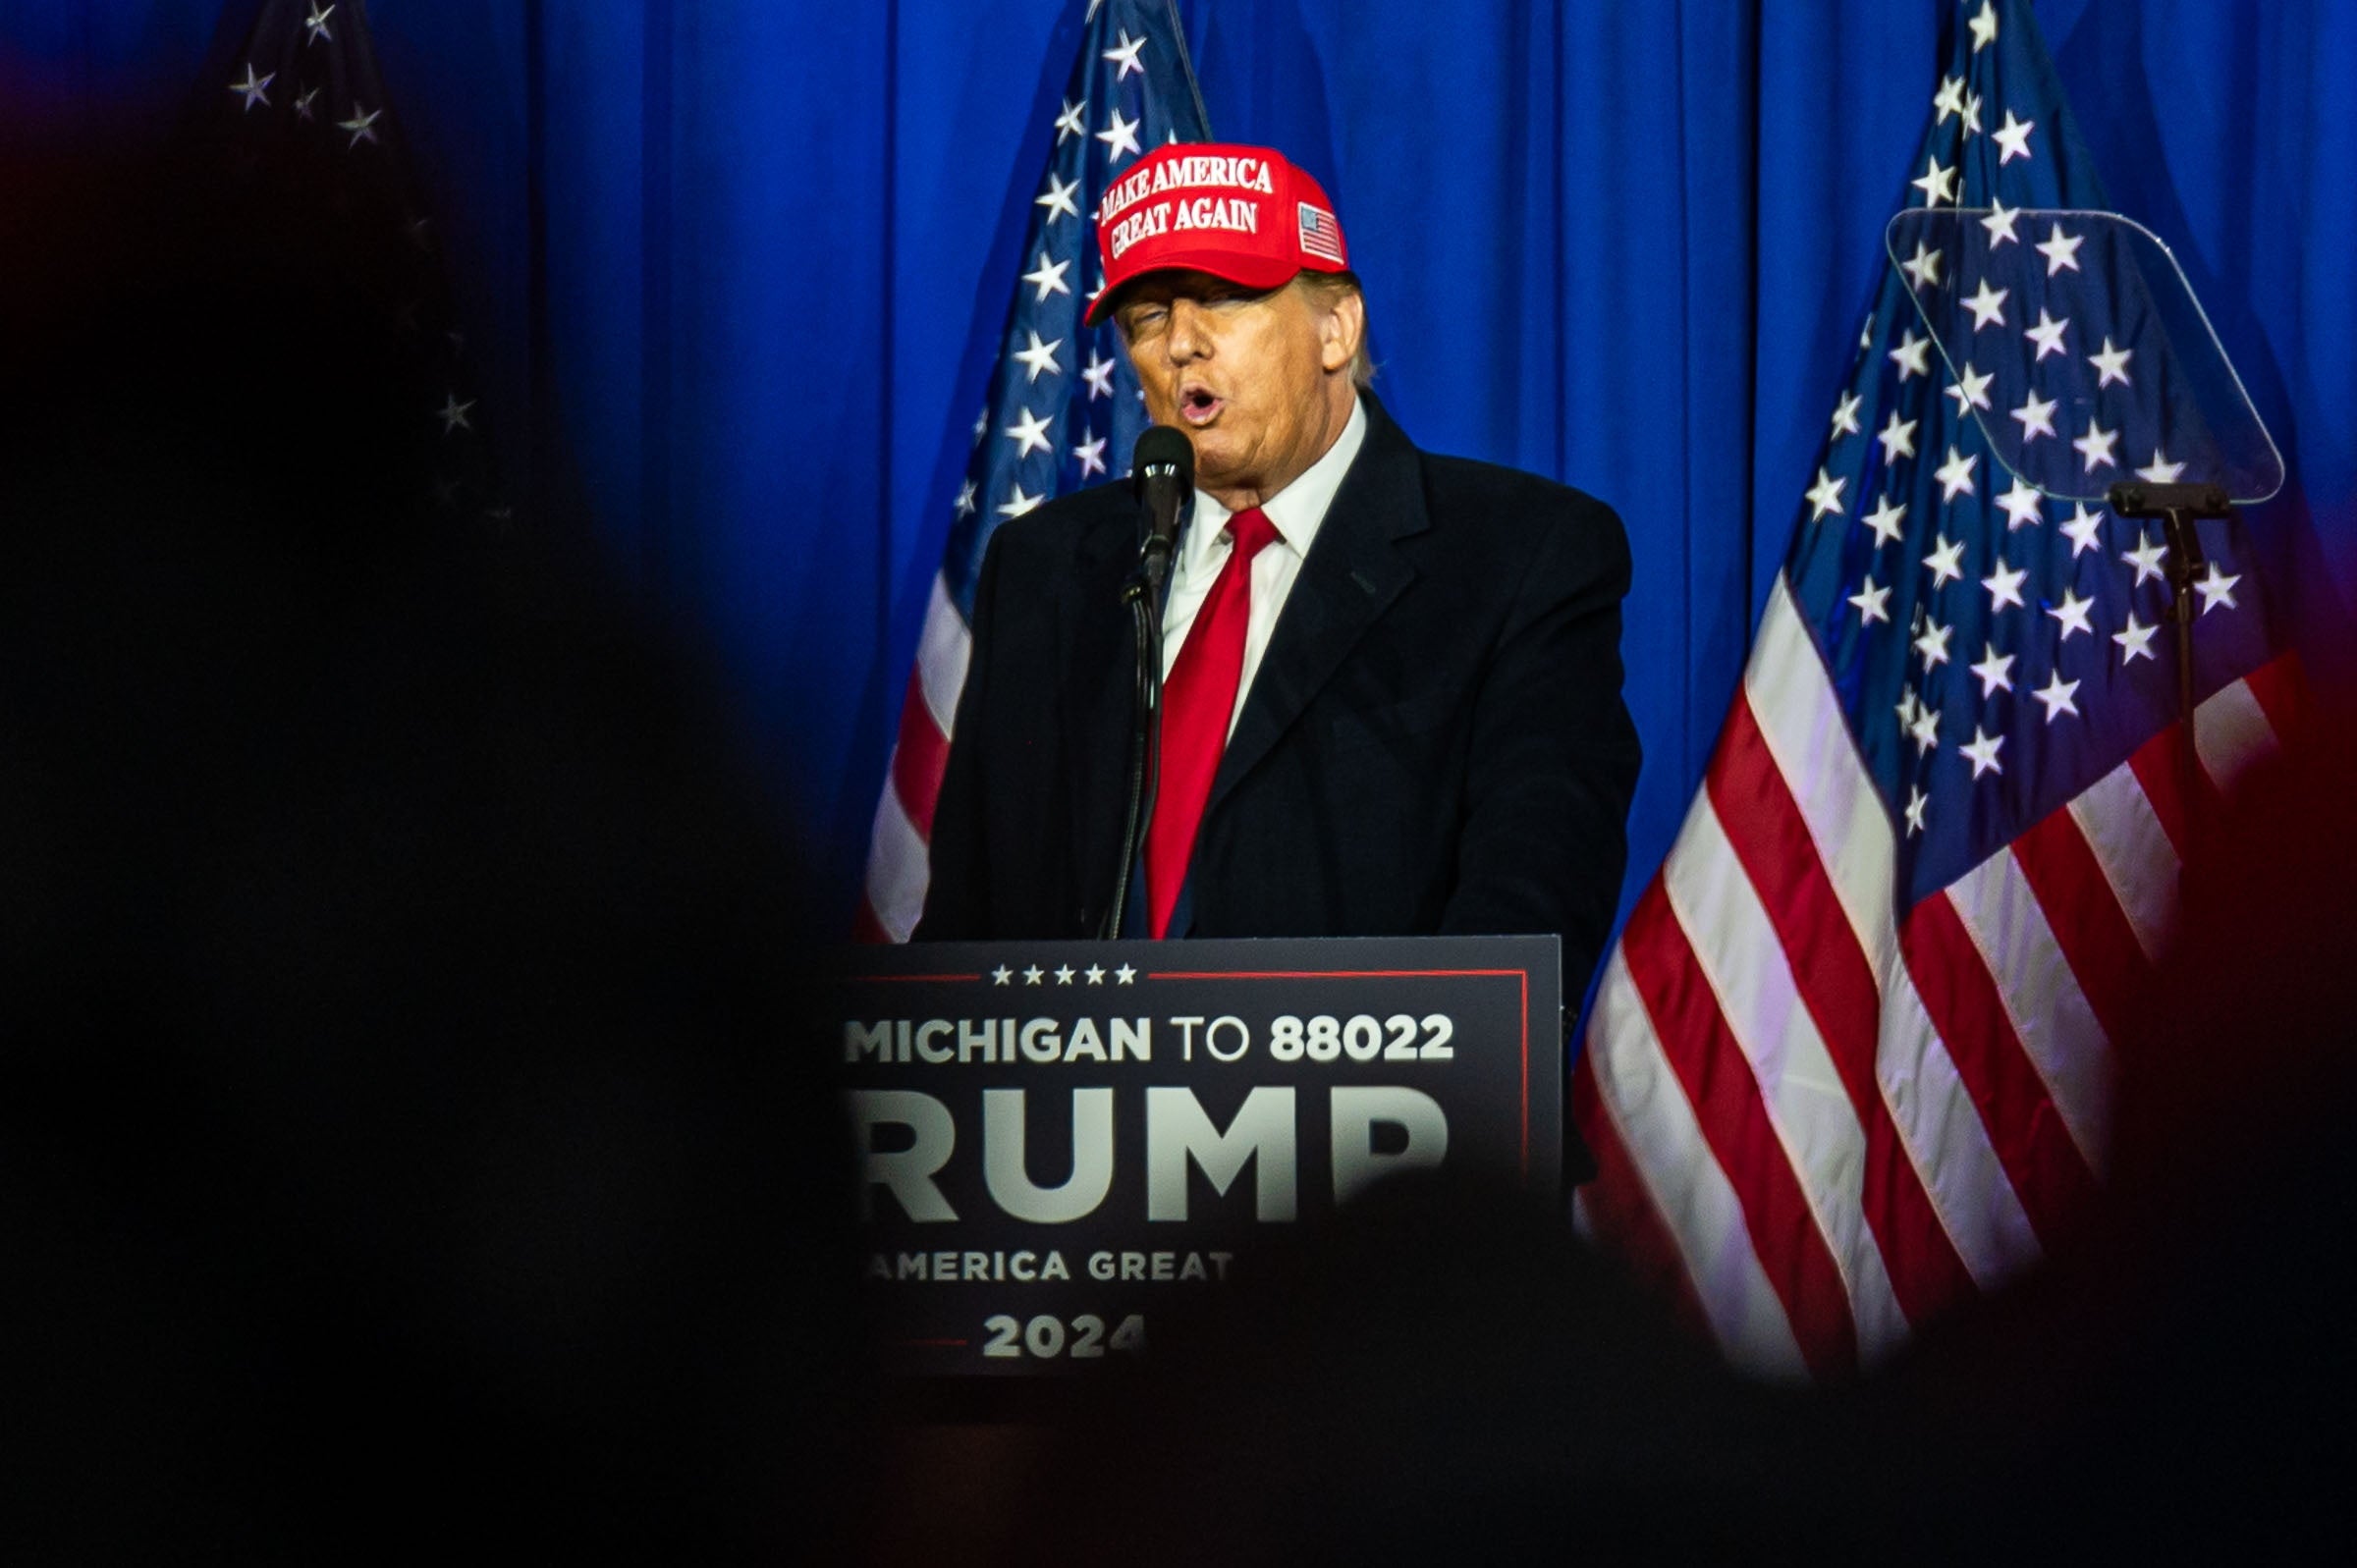 Donald Trump speaks to supporters in Michigan on 17 February, one day after a New York judge delivered a financially crushing verdict against him after a sprawling civil fraud case